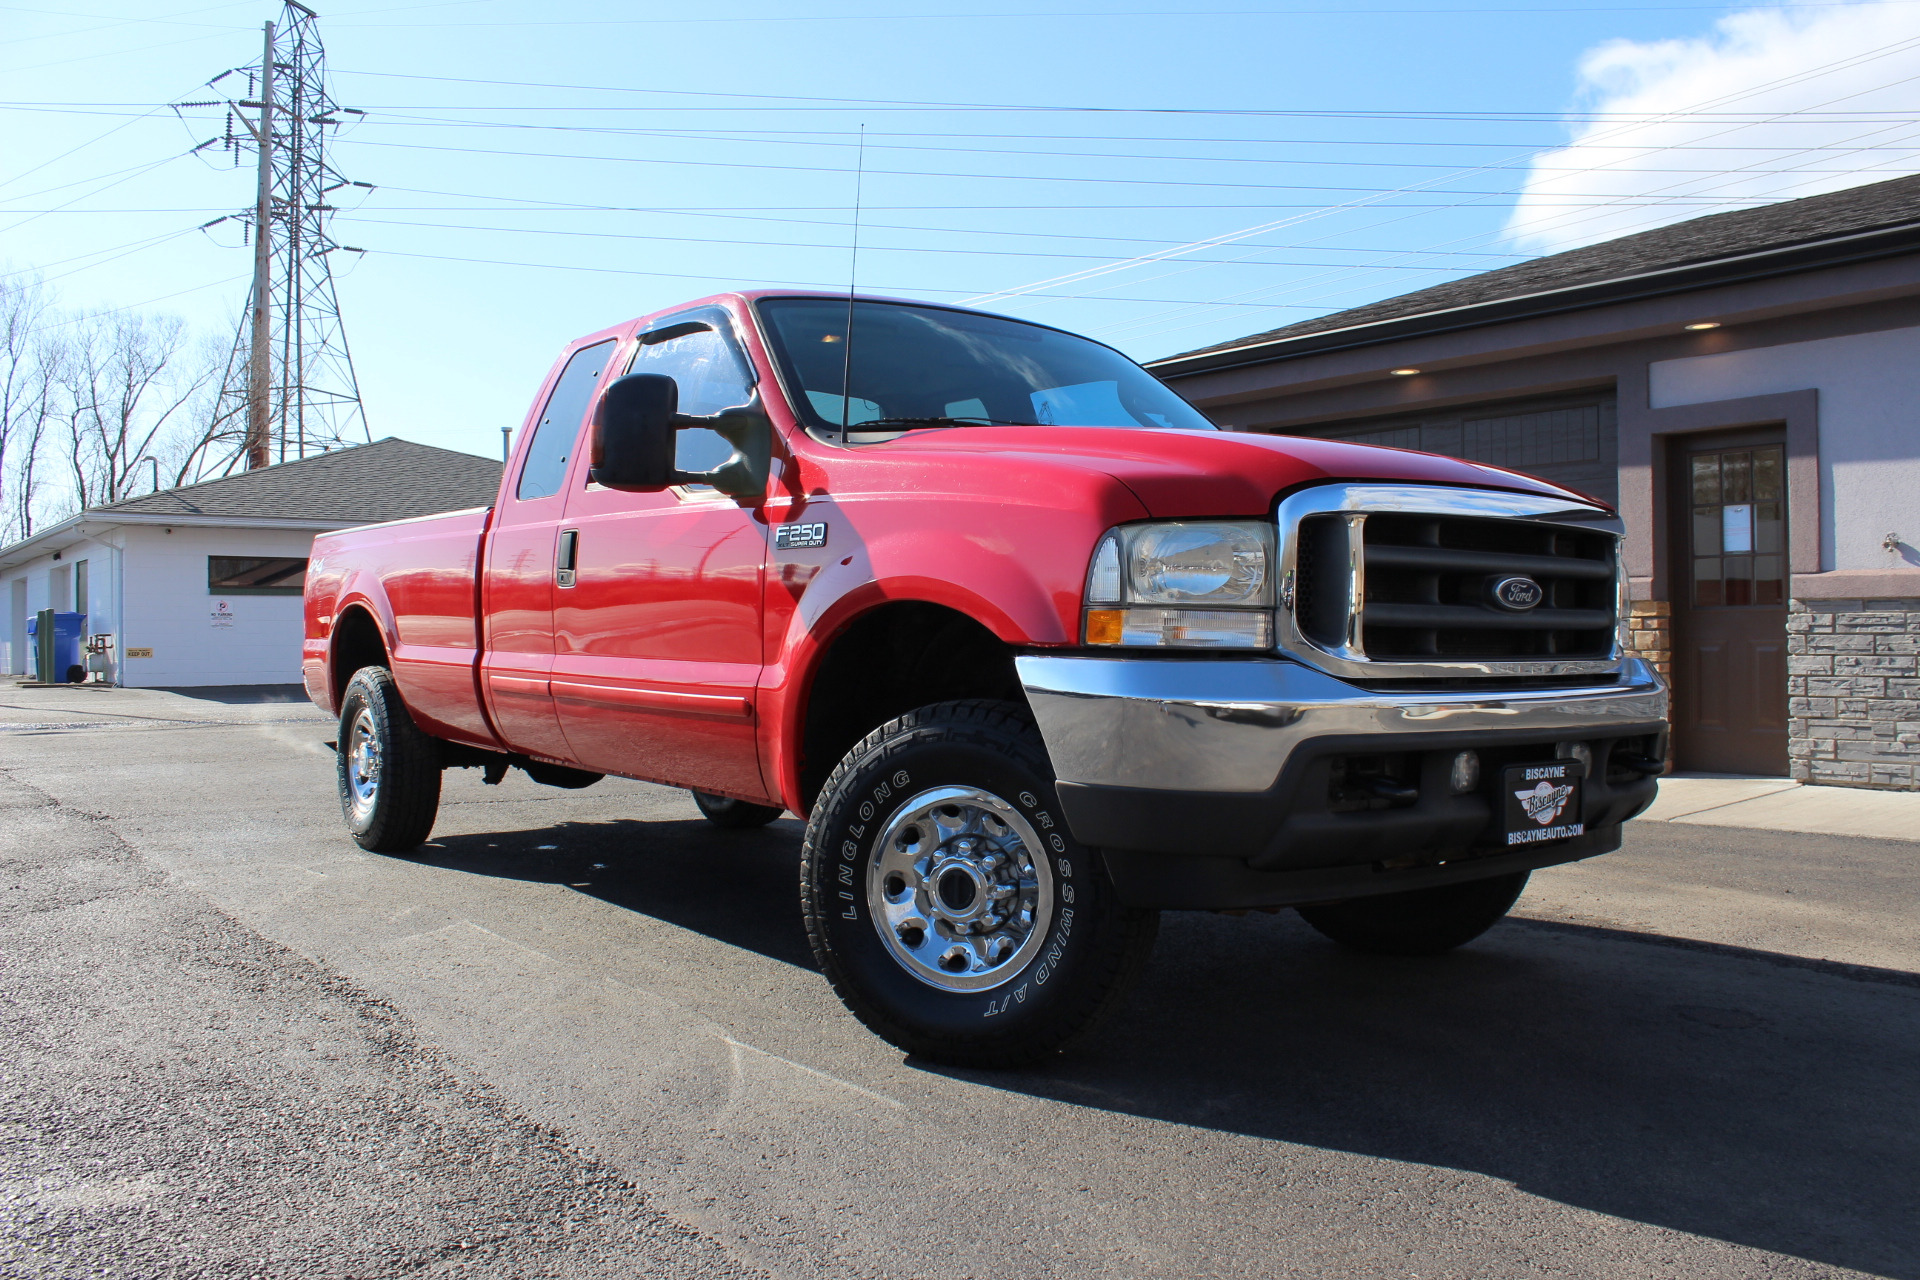 2003 Ford F-250 Super Duty XLT - Biscayne Auto Sales | Pre-owned Dealership | Ontario, NY 2003 Ford F250 Super Duty Tire Size